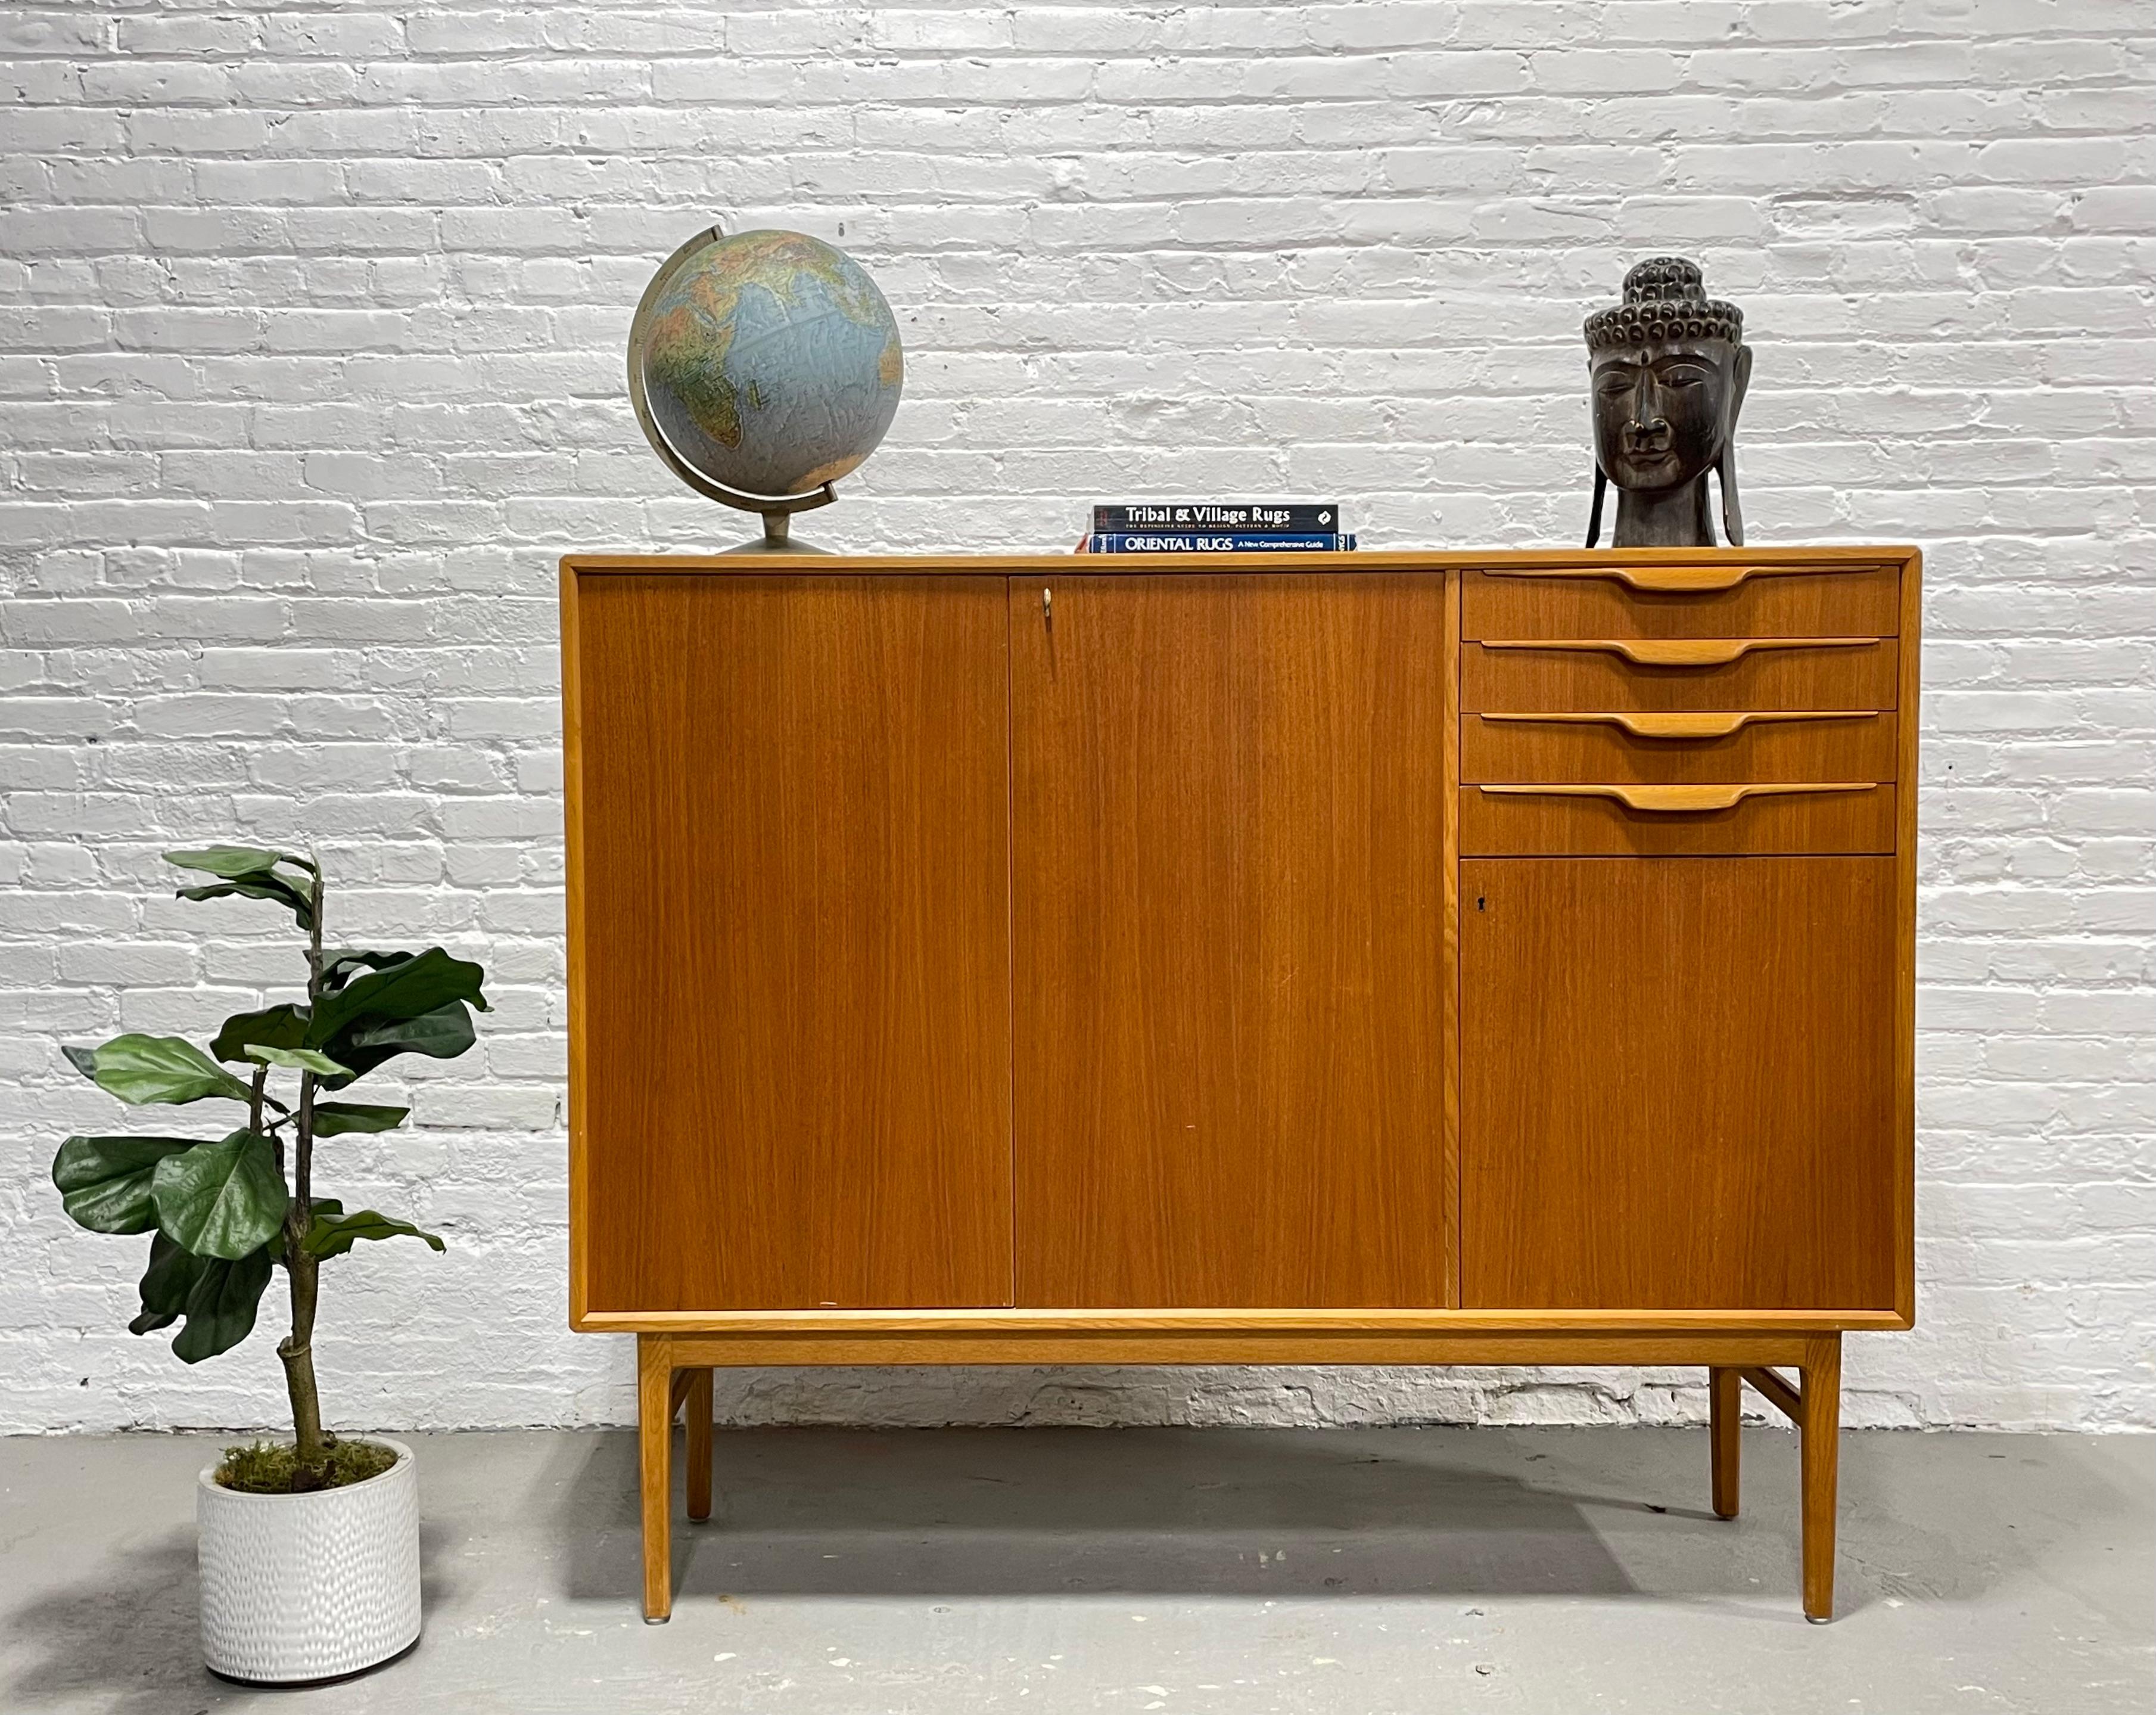 Mid-Century Modern Danish teak highboard credenza / sideboard by Beril Fridhagen for Bodafors, c. 1960's. This incredible piece is gorgeous in its simple yet extremely functional design. This beauty offers double lockable doors (key included!) with